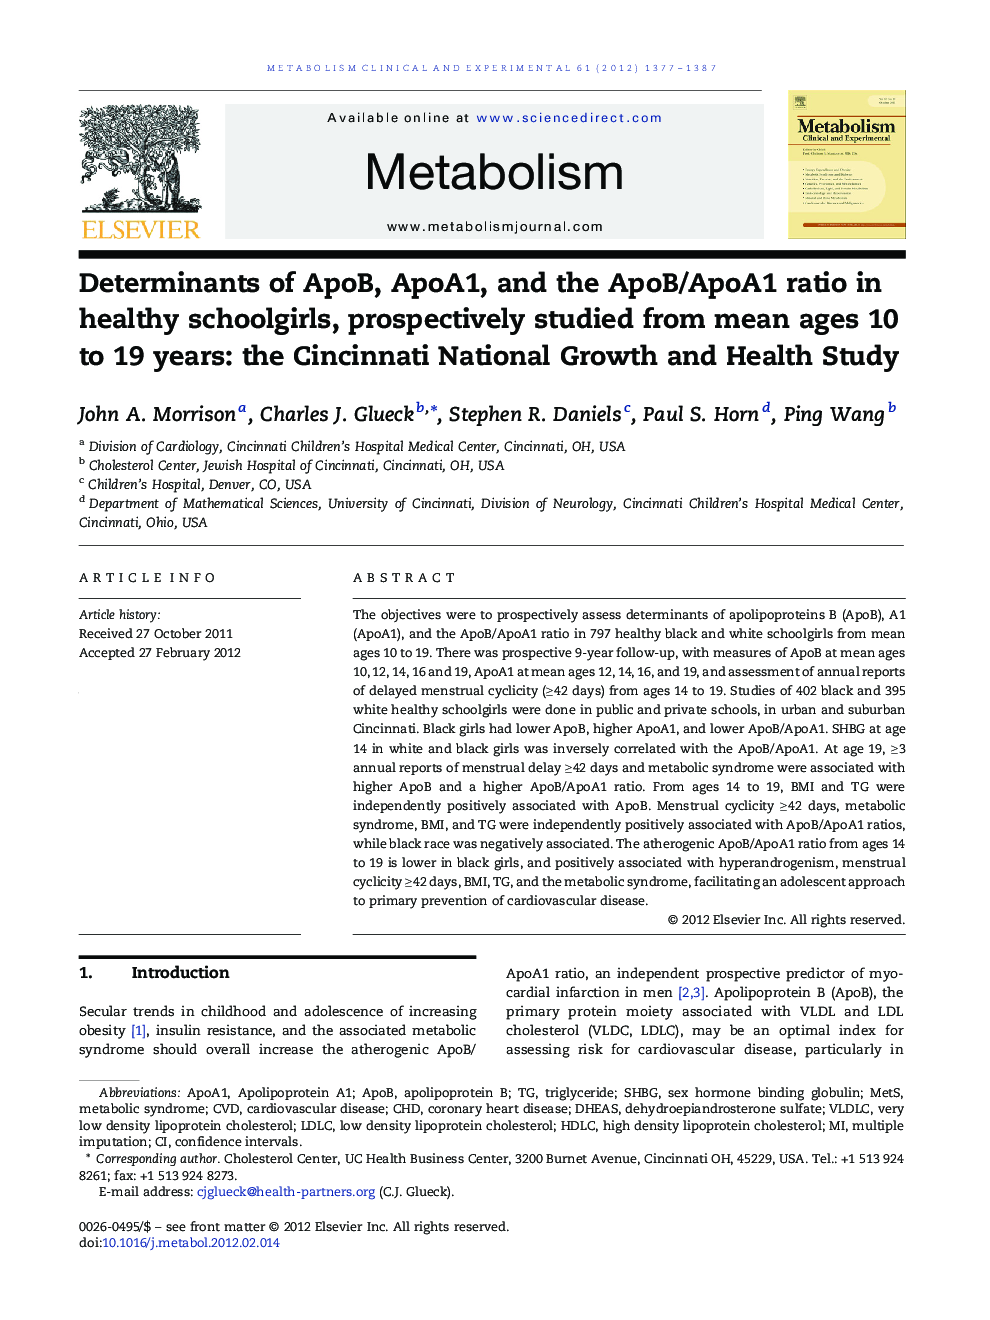 Determinants of ApoB, ApoA1, and the ApoB/ApoA1 ratio in healthy schoolgirls, prospectively studied from mean ages 10 to 19 years: the Cincinnati National Growth and Health Study